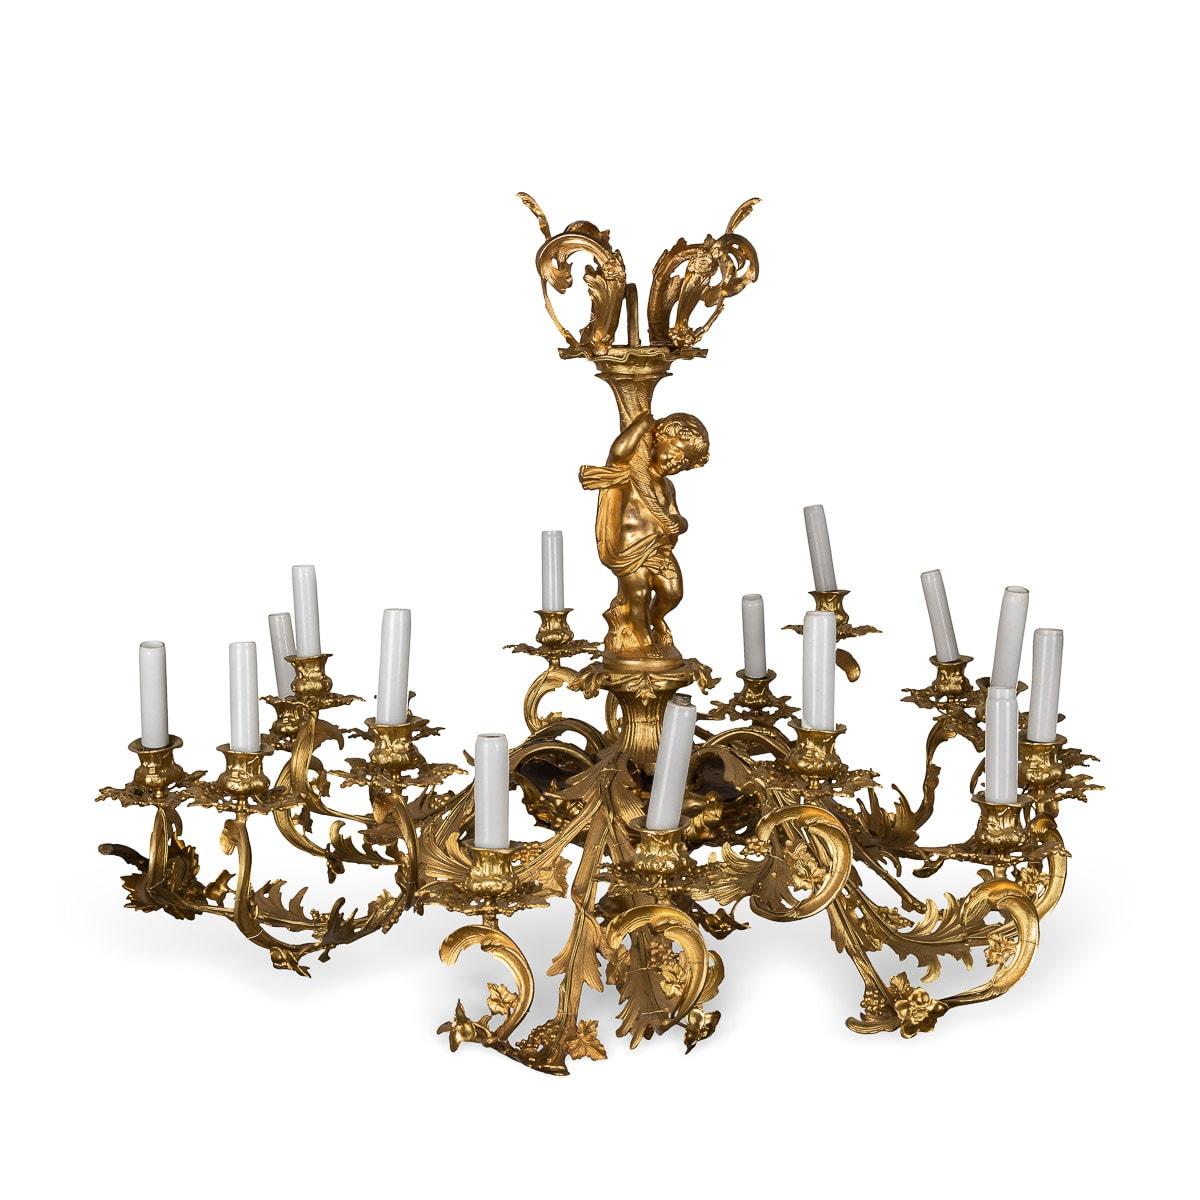 Antique 18th Century Italian ormolu chandelier in rococo style with putti stem ornaments. This chandelier is in superb condition, the foliate branch arms issuing from the putti has been converted to accomodate an electrical supply to the 15